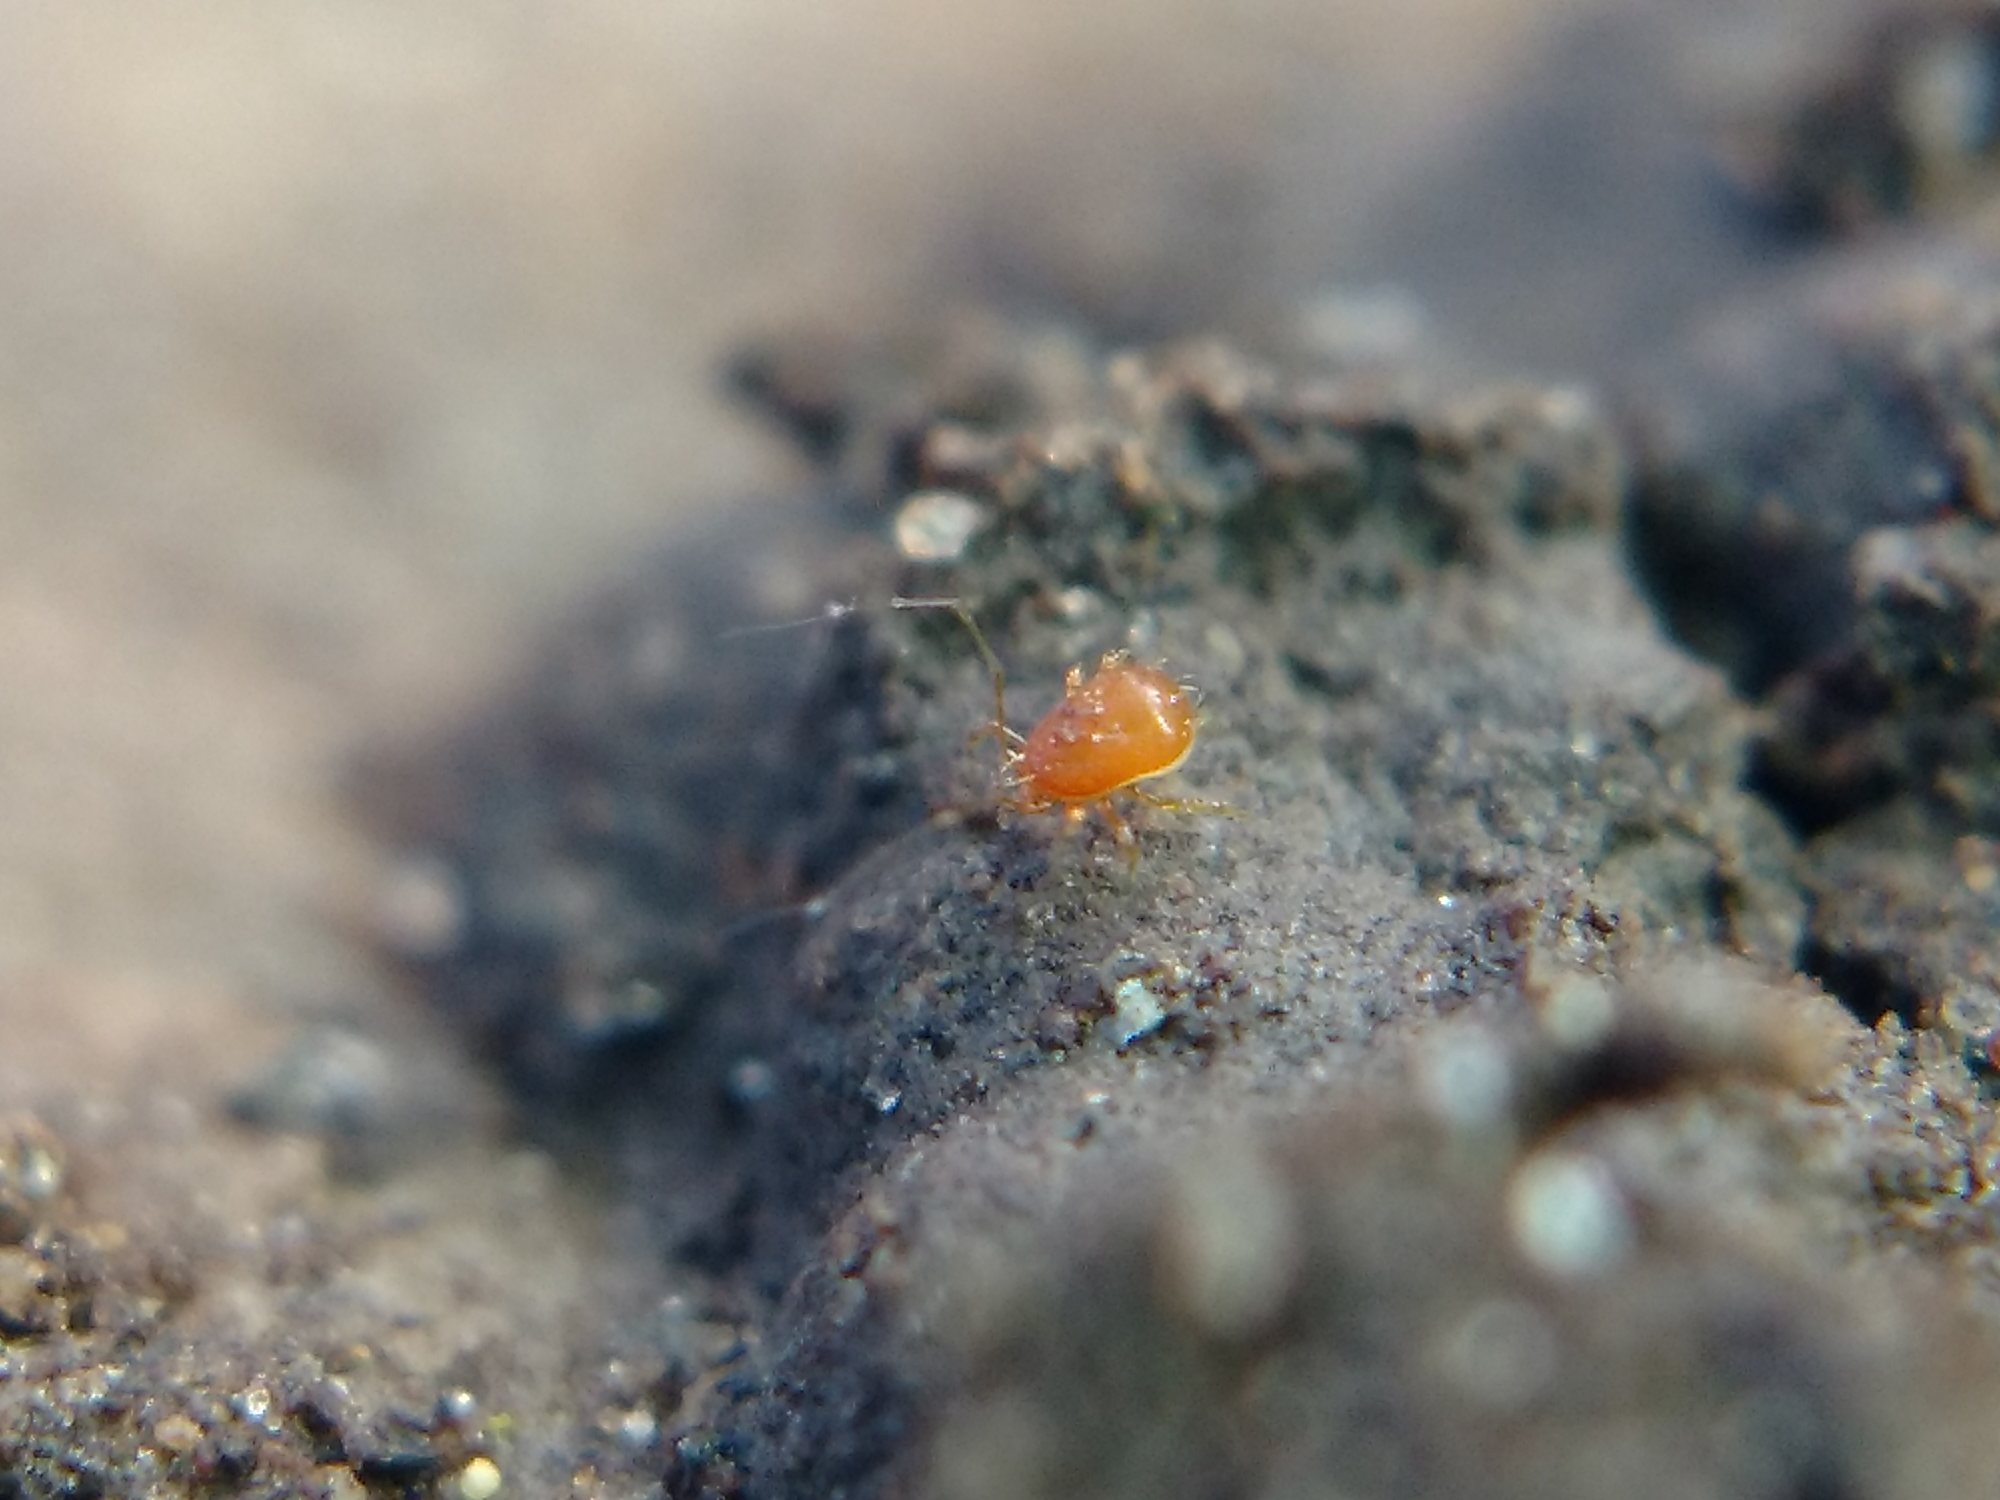 A tiny golden-brown mite whose first pair of legs is very long and spindly